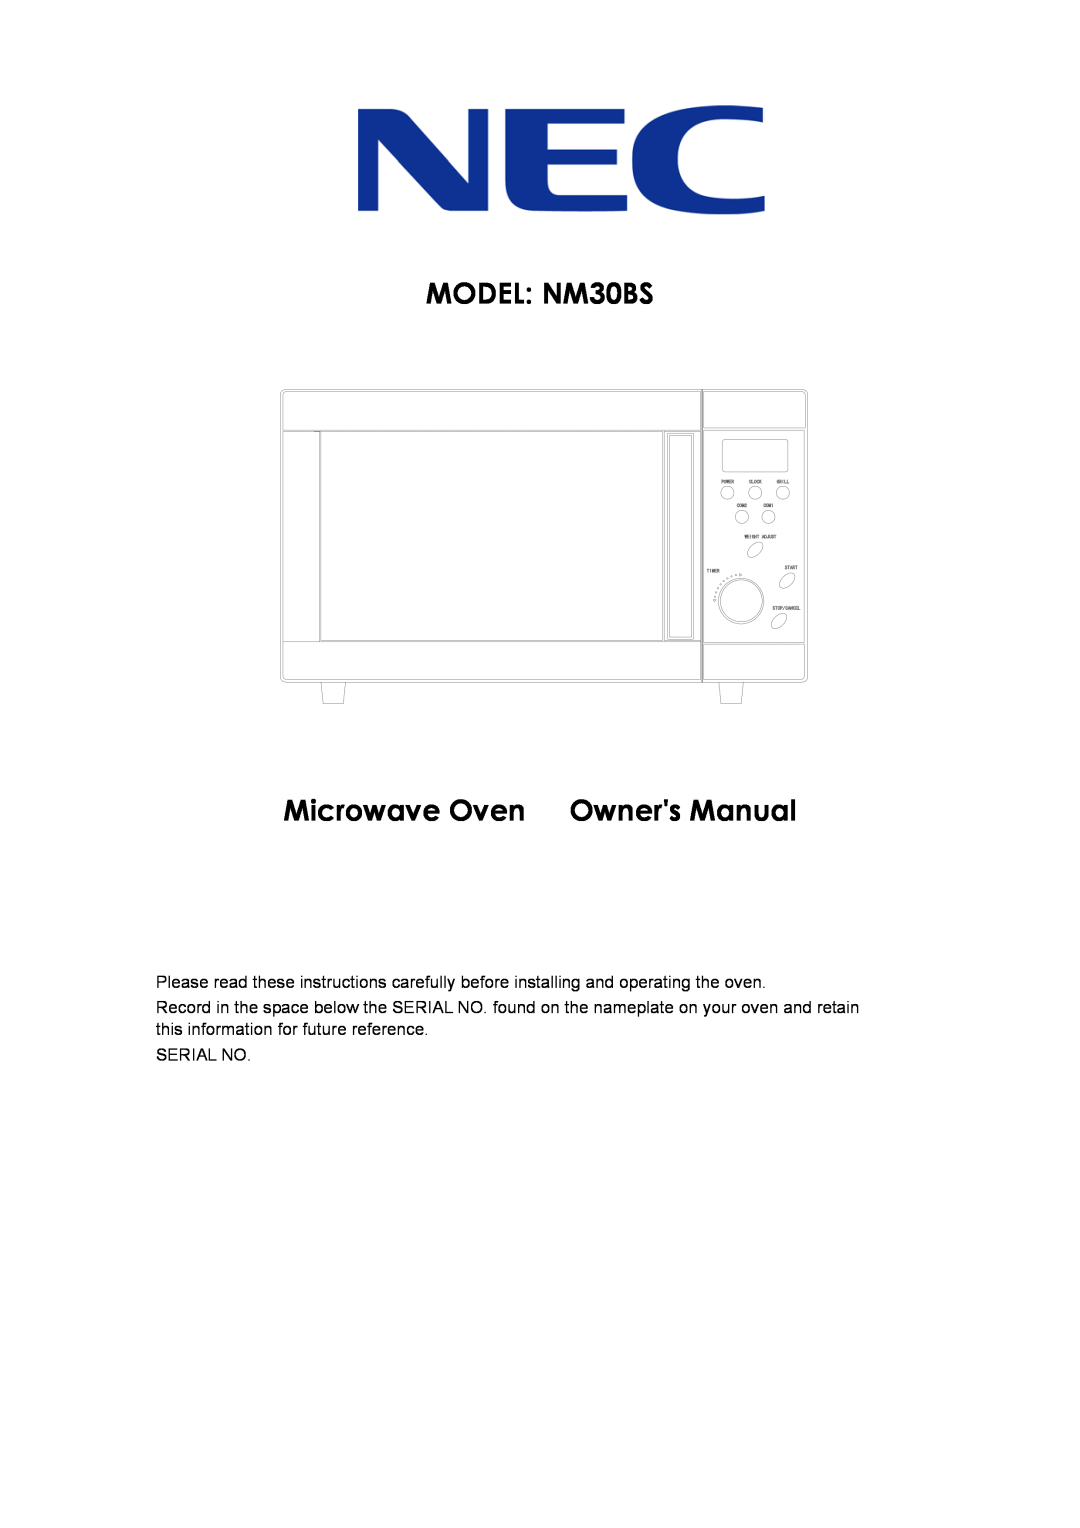 NEC owner manual MODEL NM30BS Microwave Oven Owners Manual 